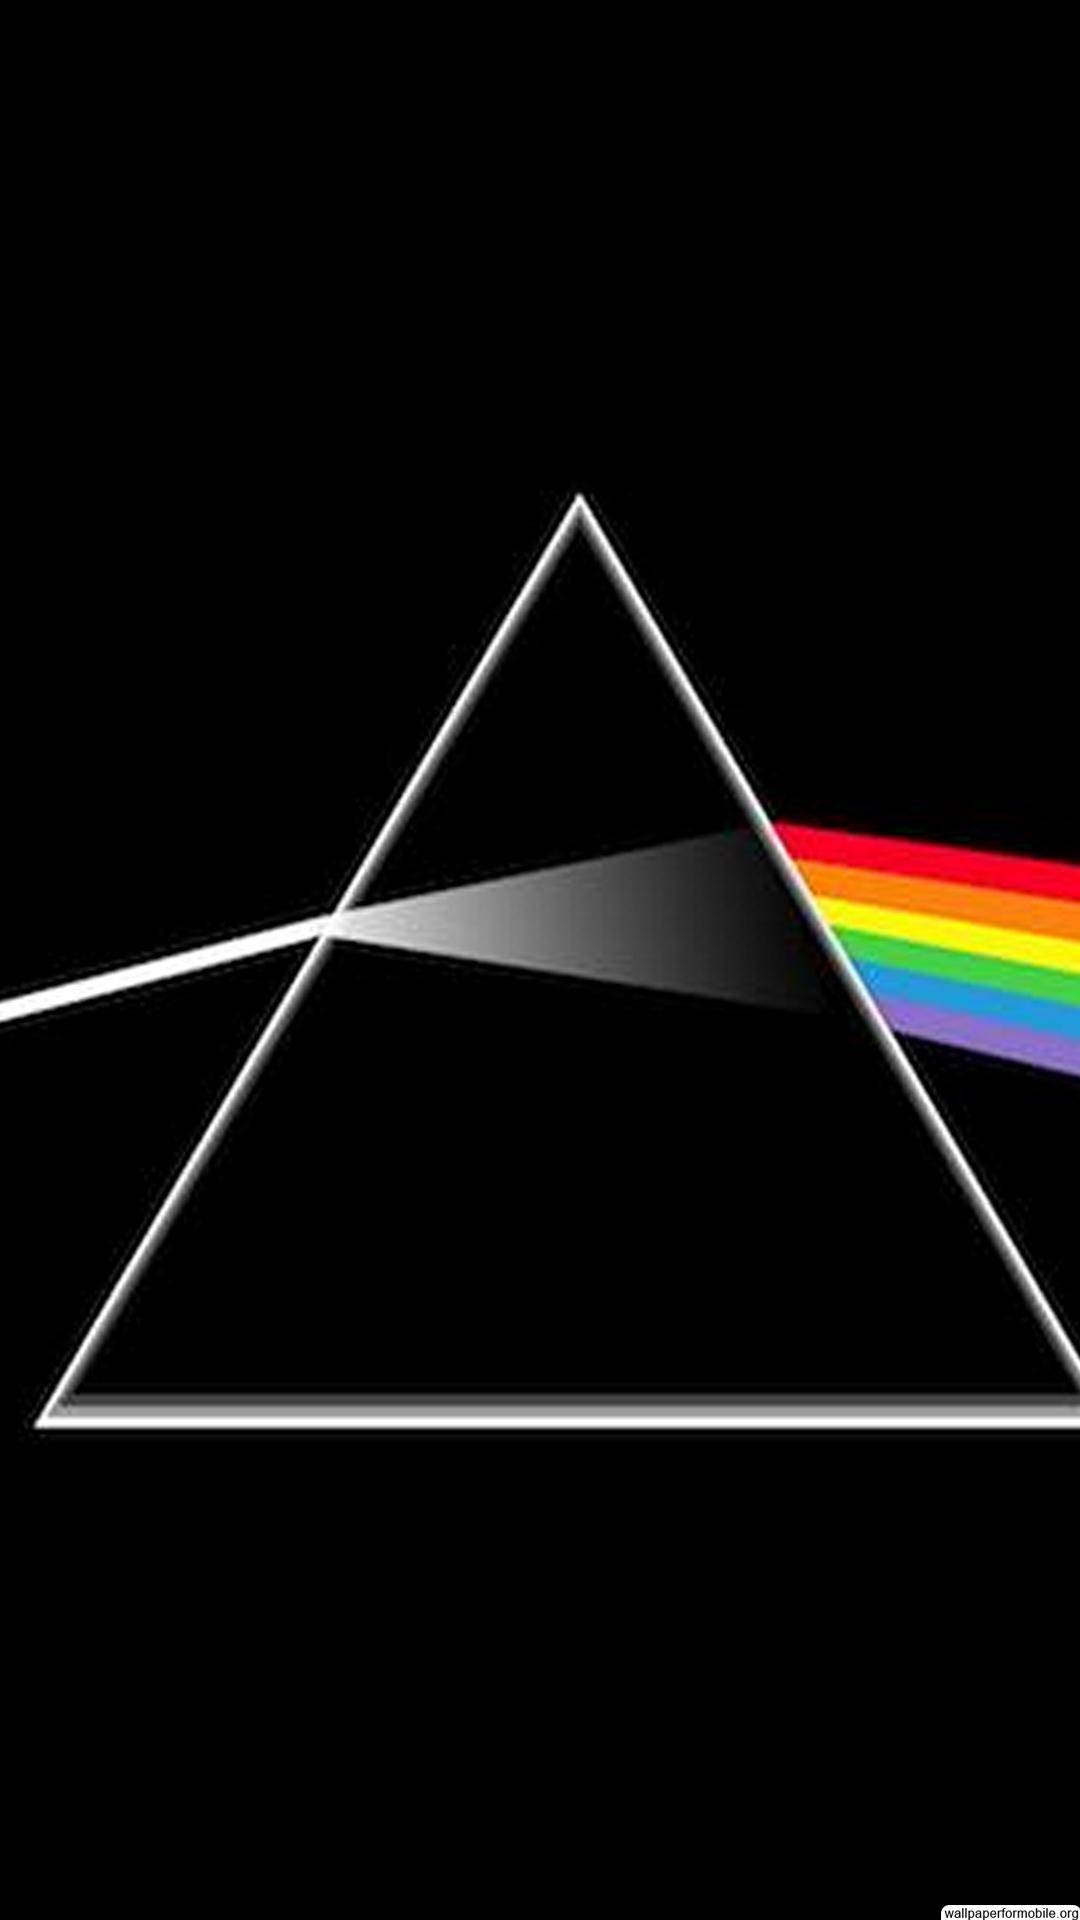 Dark Side Of The Moon Android Wallpaper